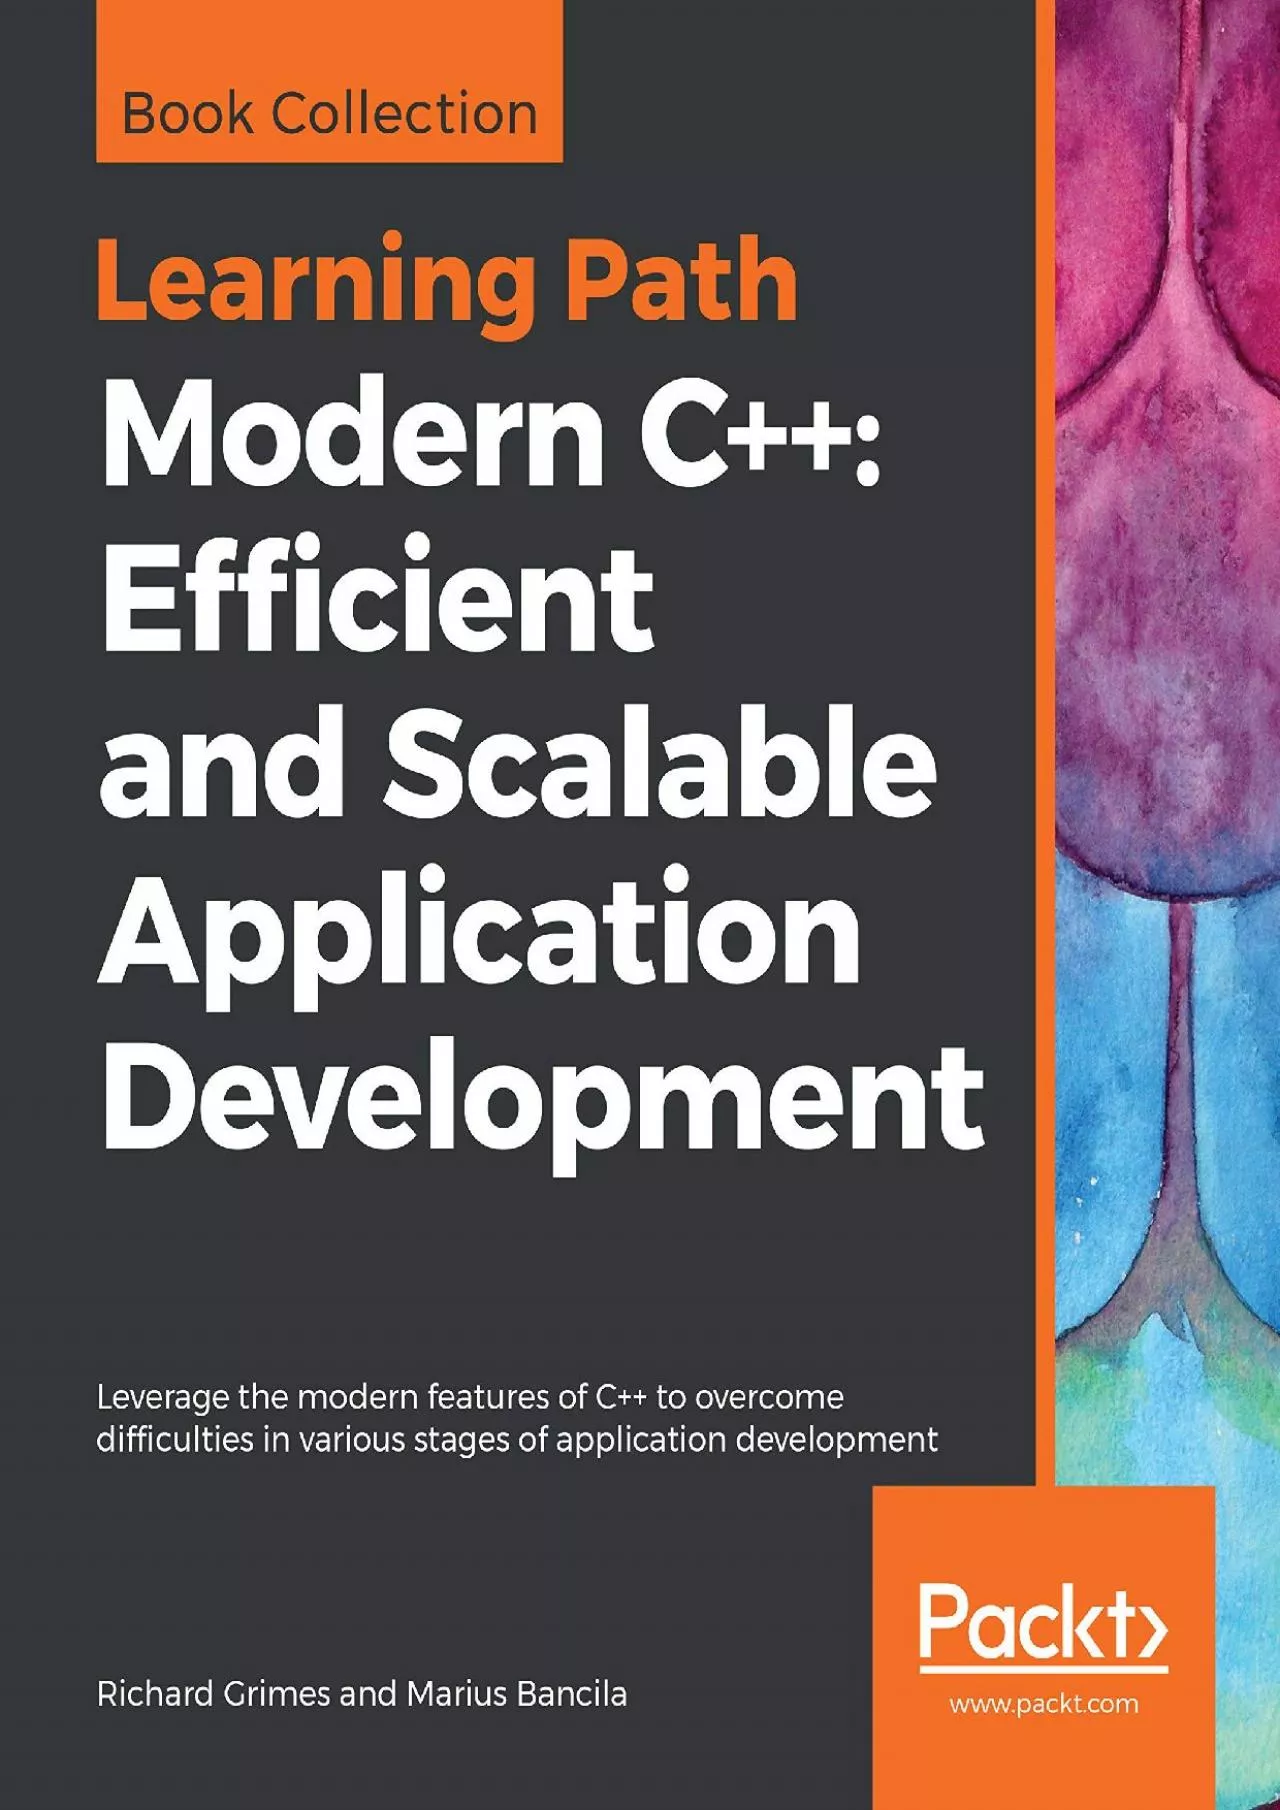 [FREE]-Modern C++: Efficient and Scalable Application Development: Leverage the modern